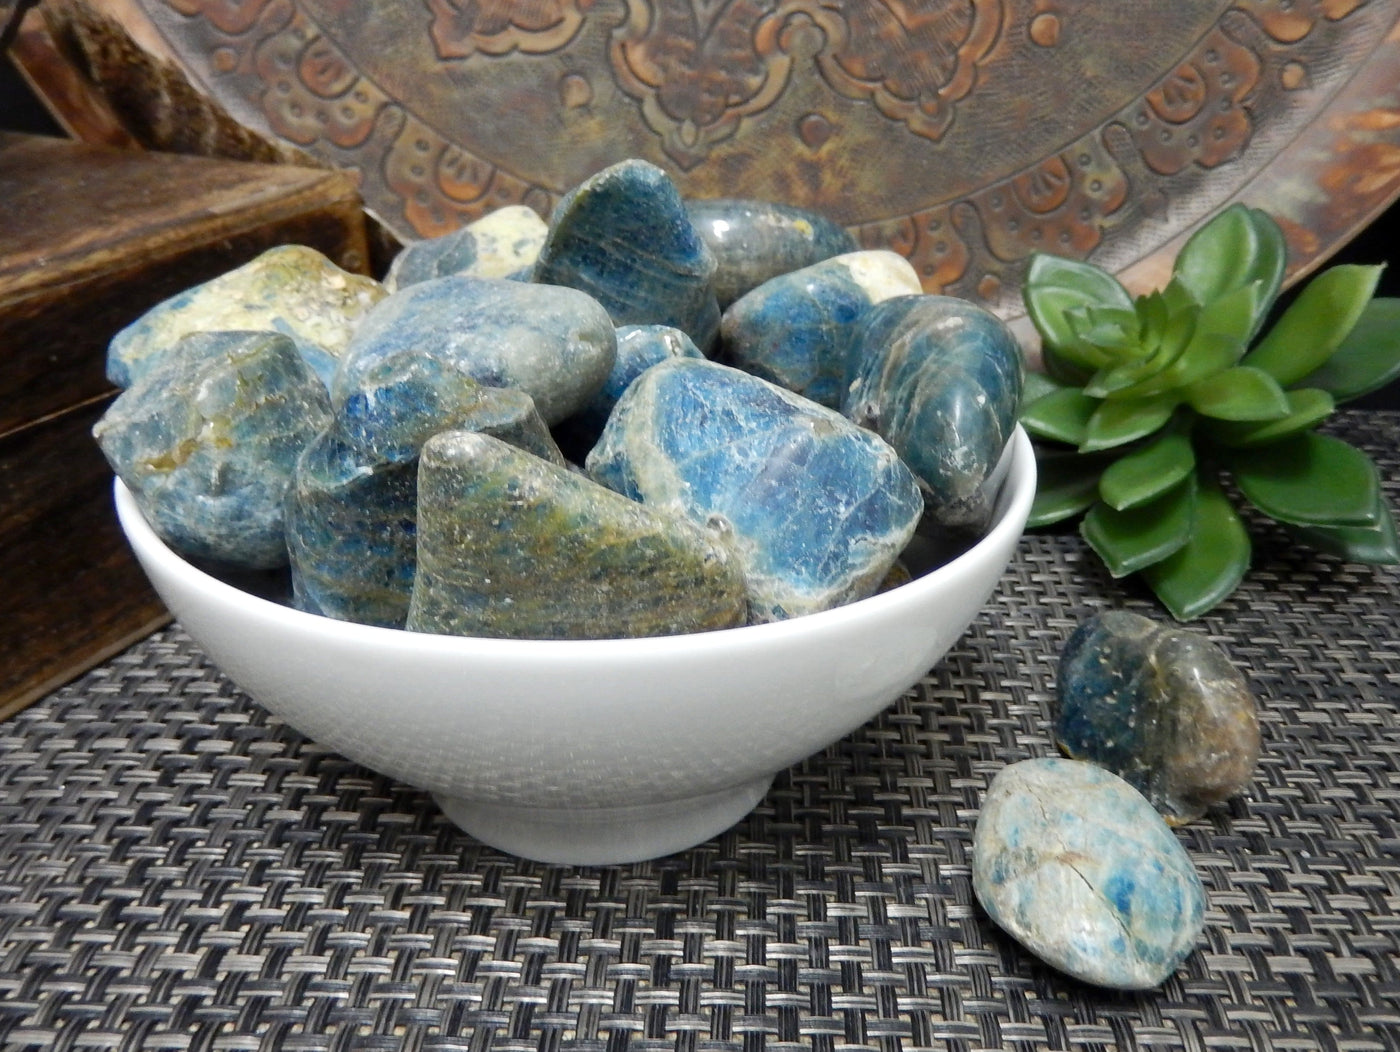 Blue apatite tumbled stones in a white bowl.